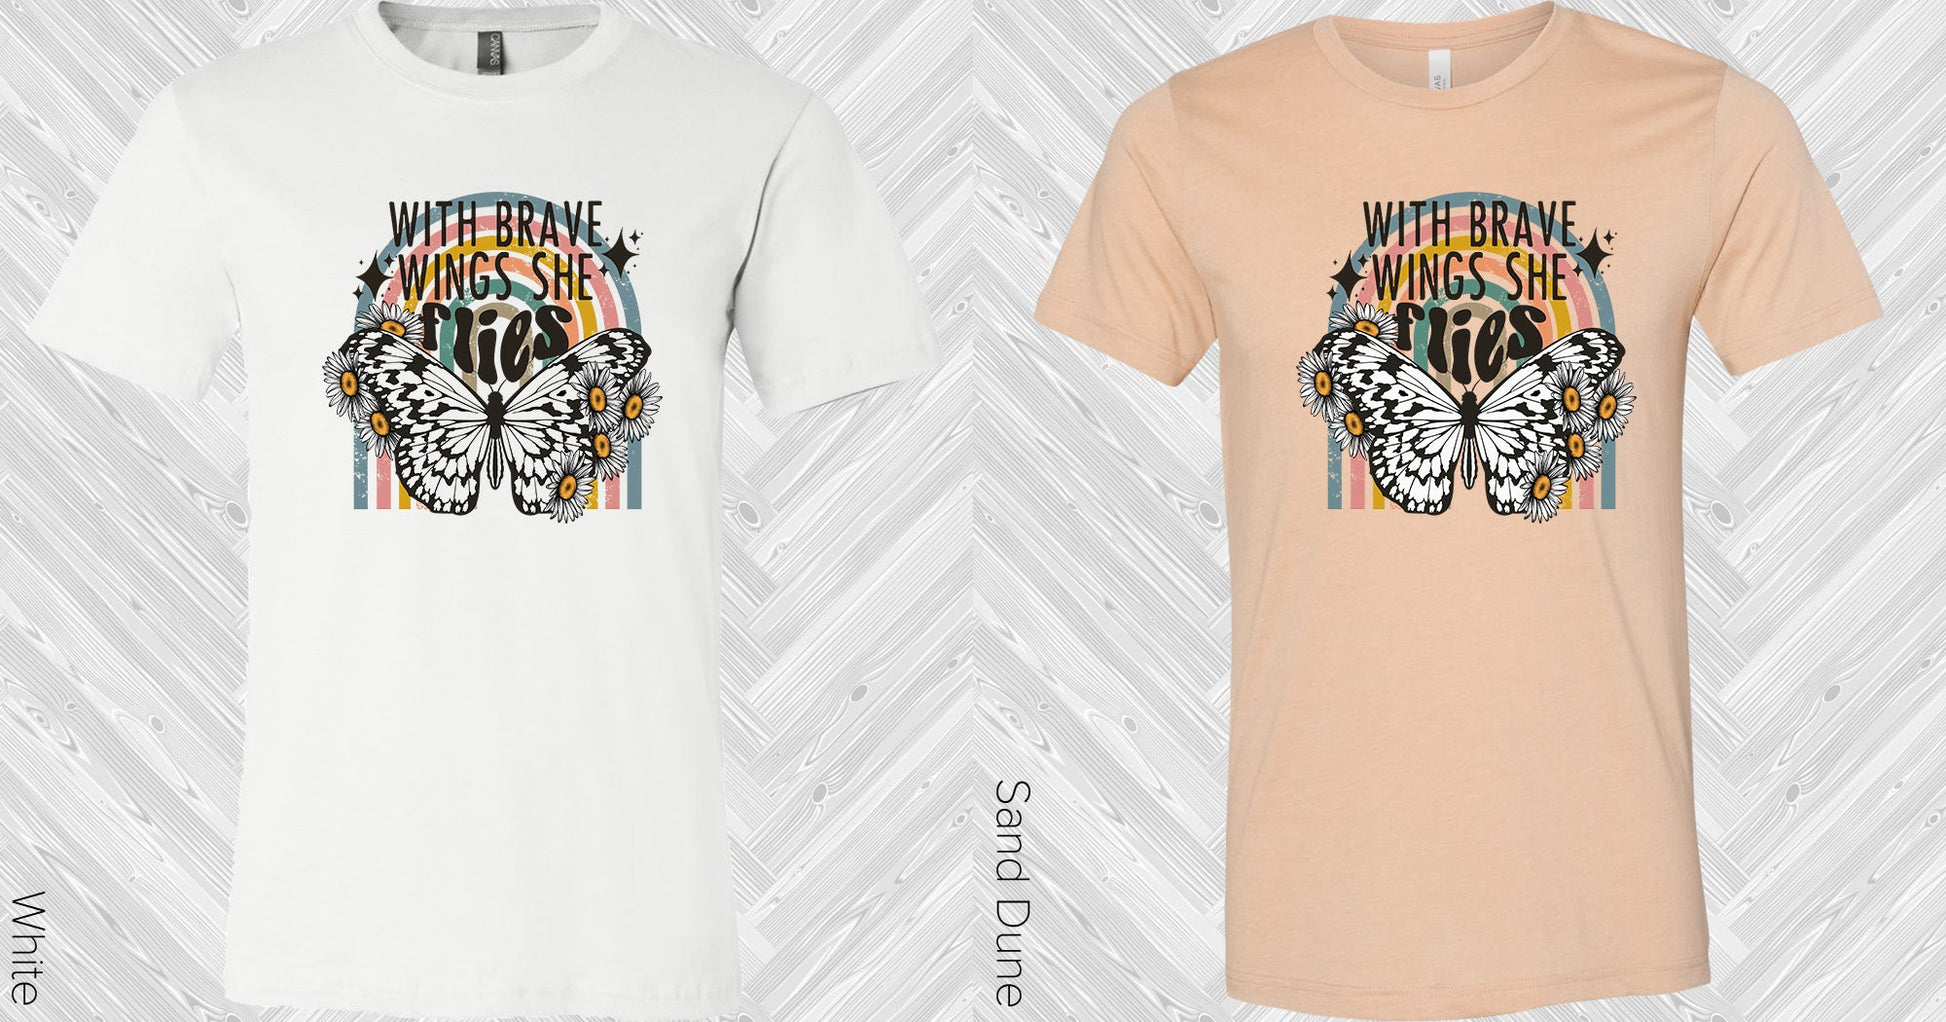 With Brave Wings She Flies Graphic Tee Graphic Tee